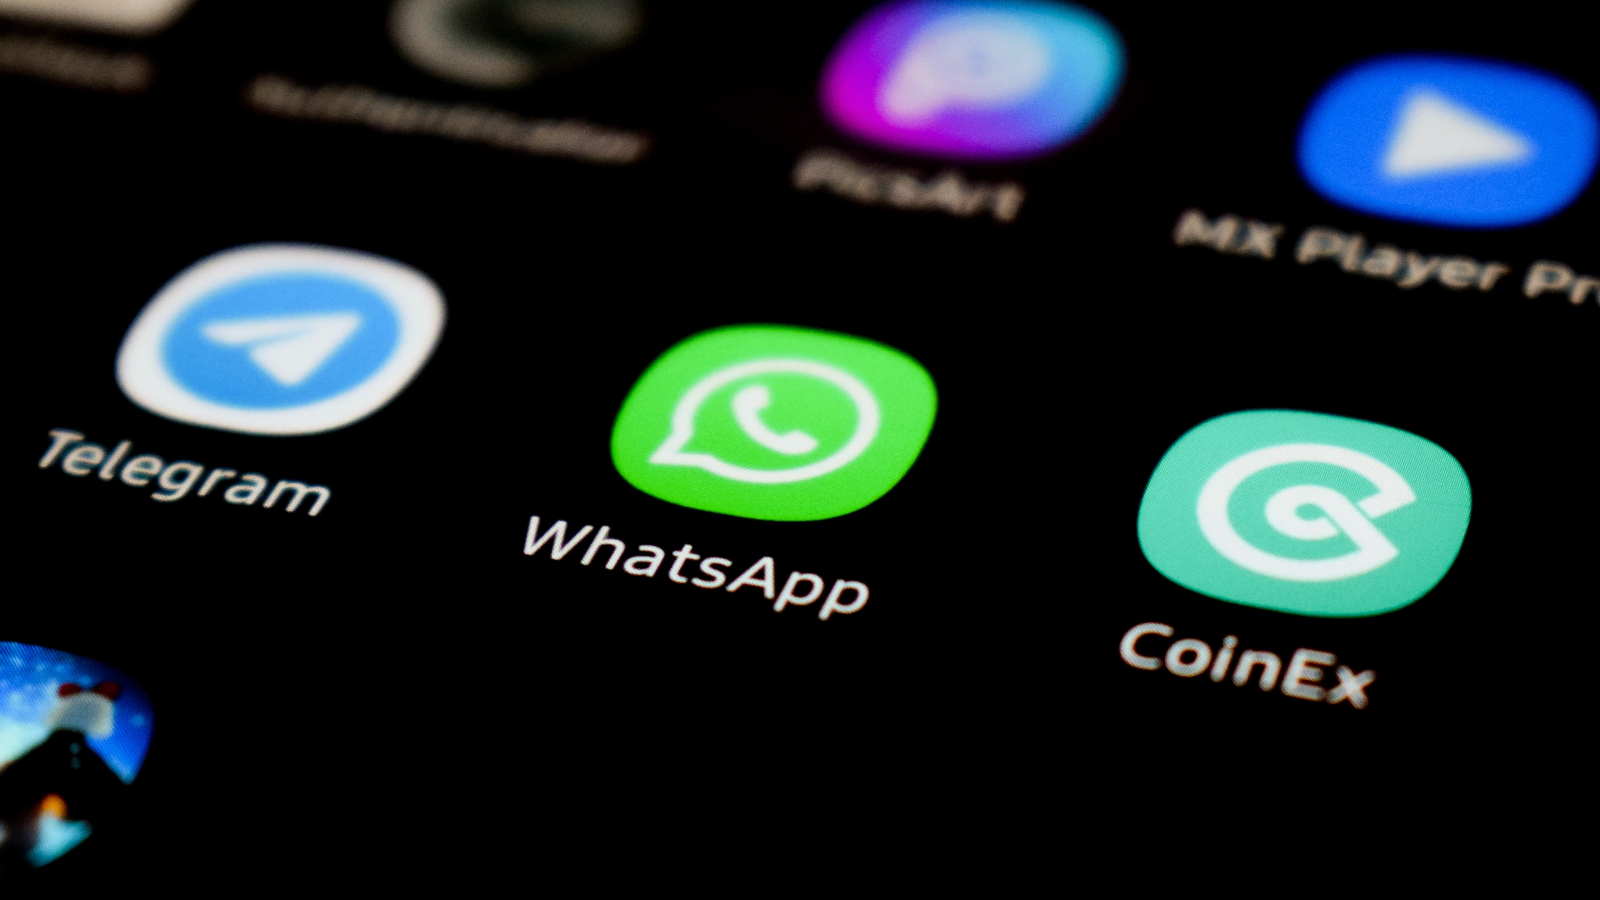 WhatsApp beta on Android introduces screen-sharing - here's how to enable it